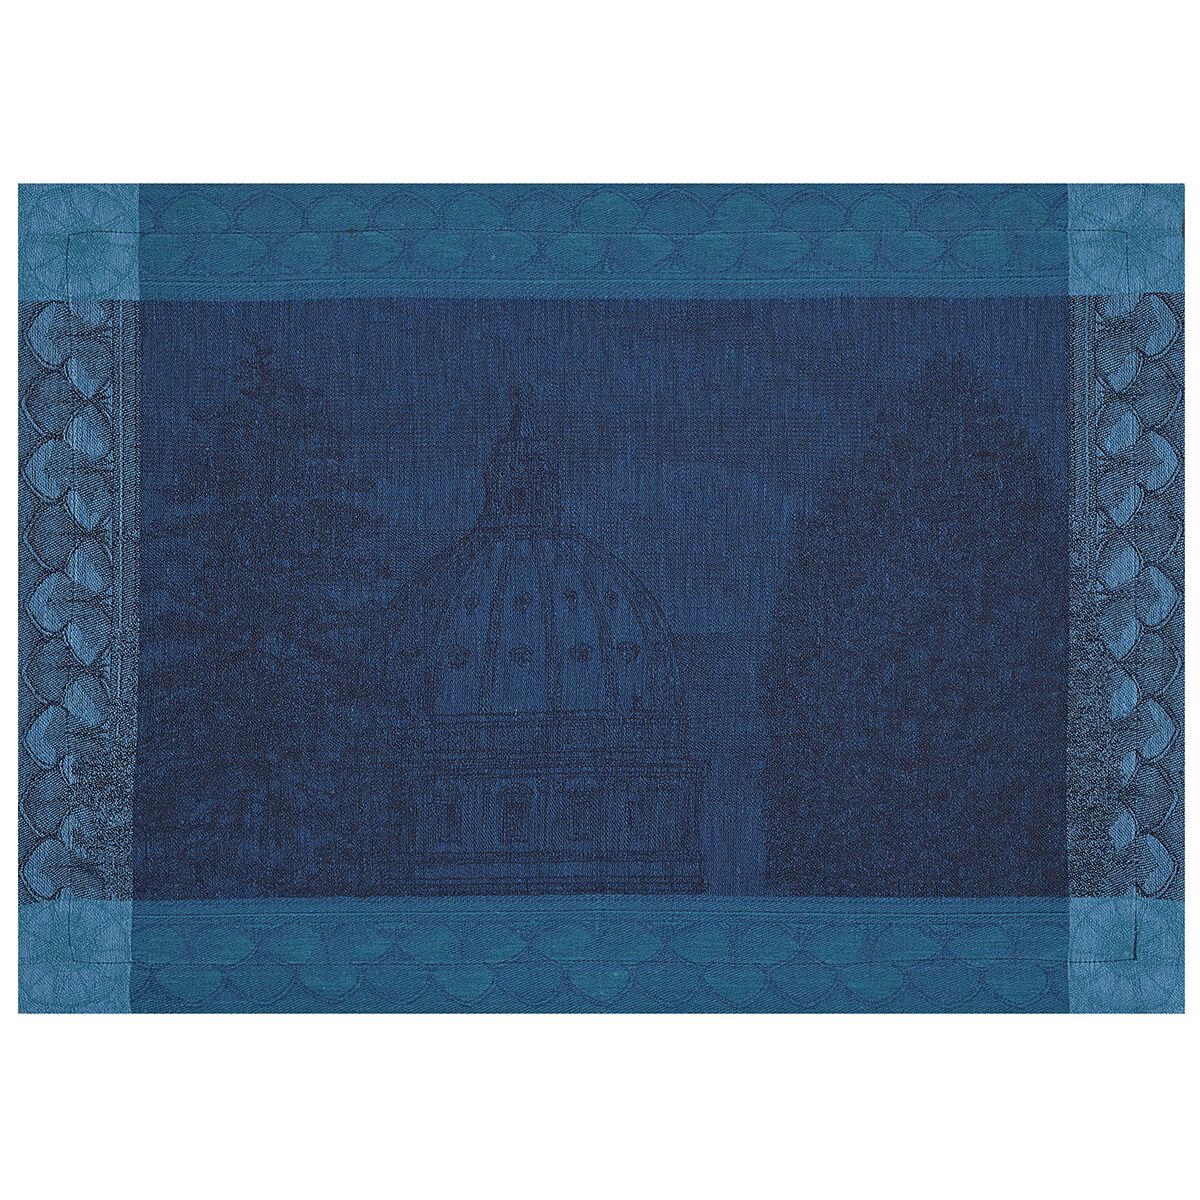 Symphonie Baroque Tablecloth, Placemats, Napkins & Runners